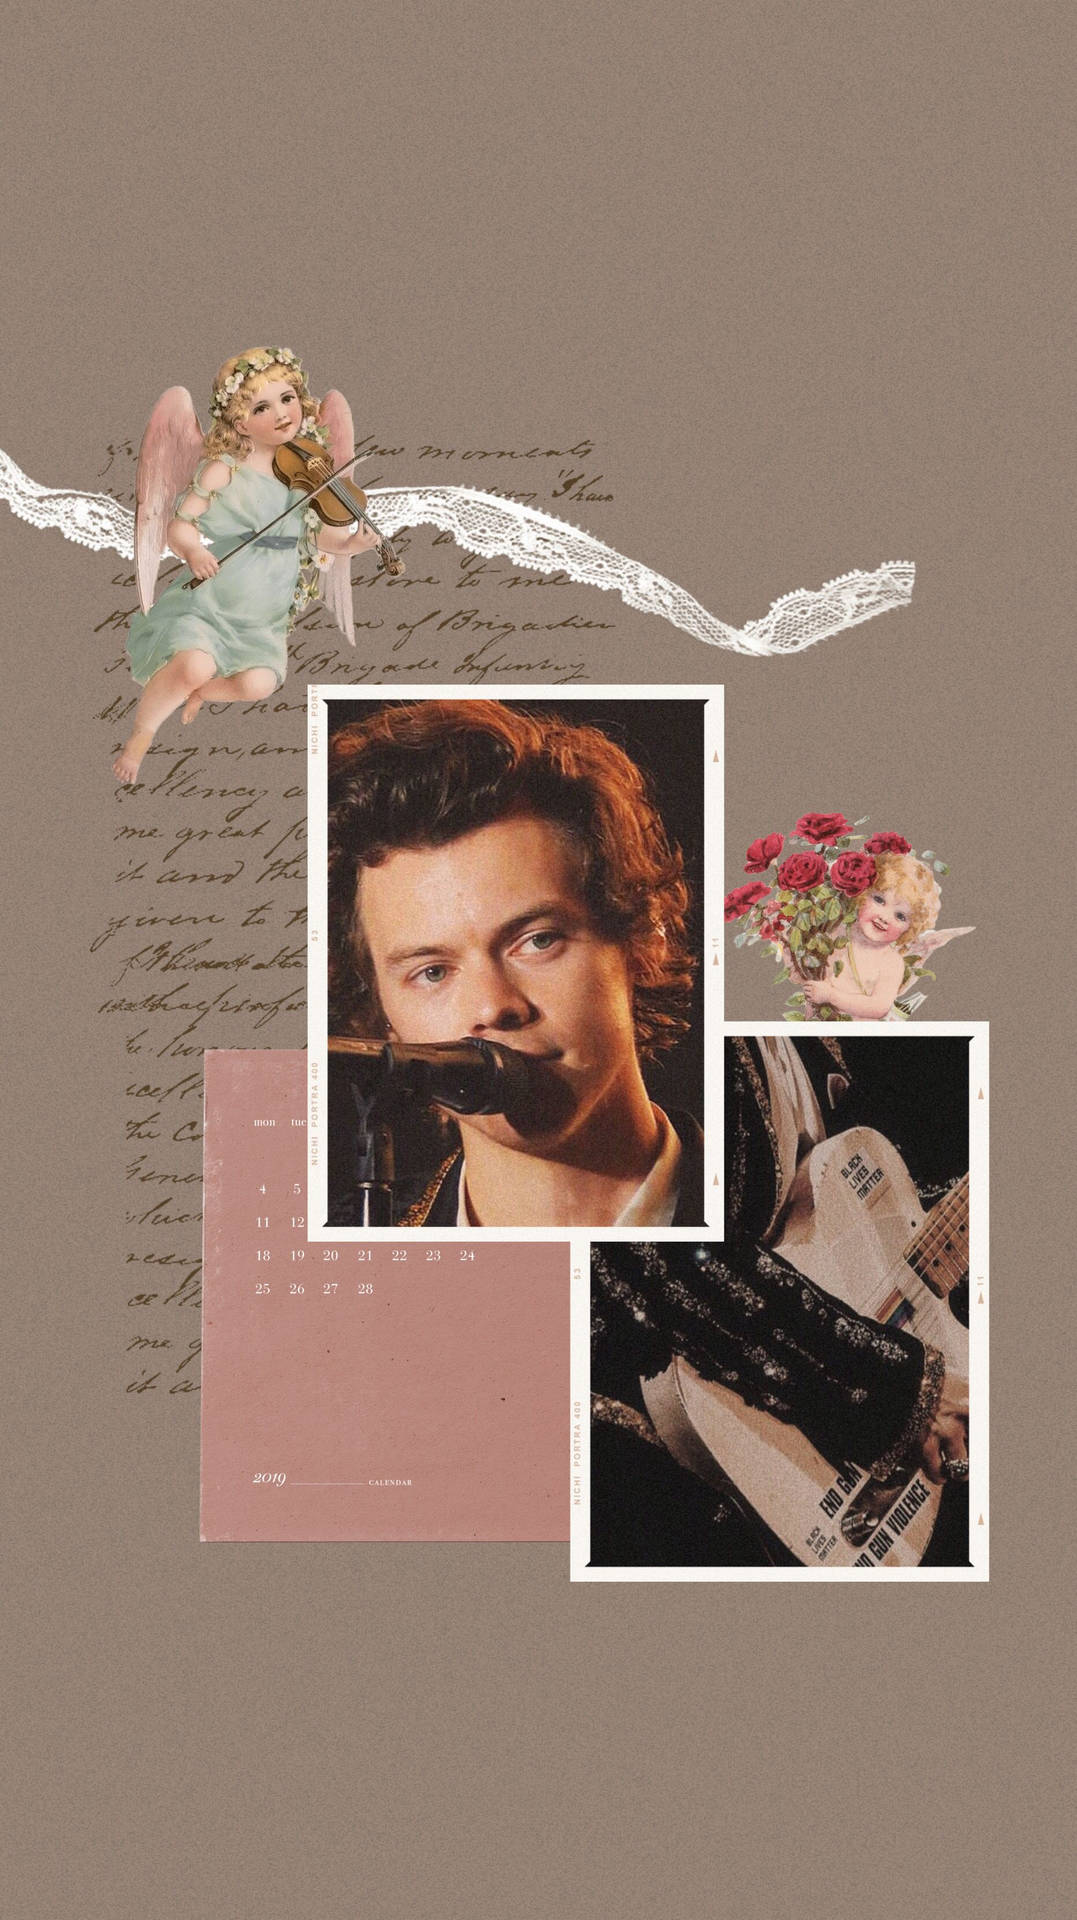 Collage of Harry Styles, angel, flowers, and guitar - Harry Styles